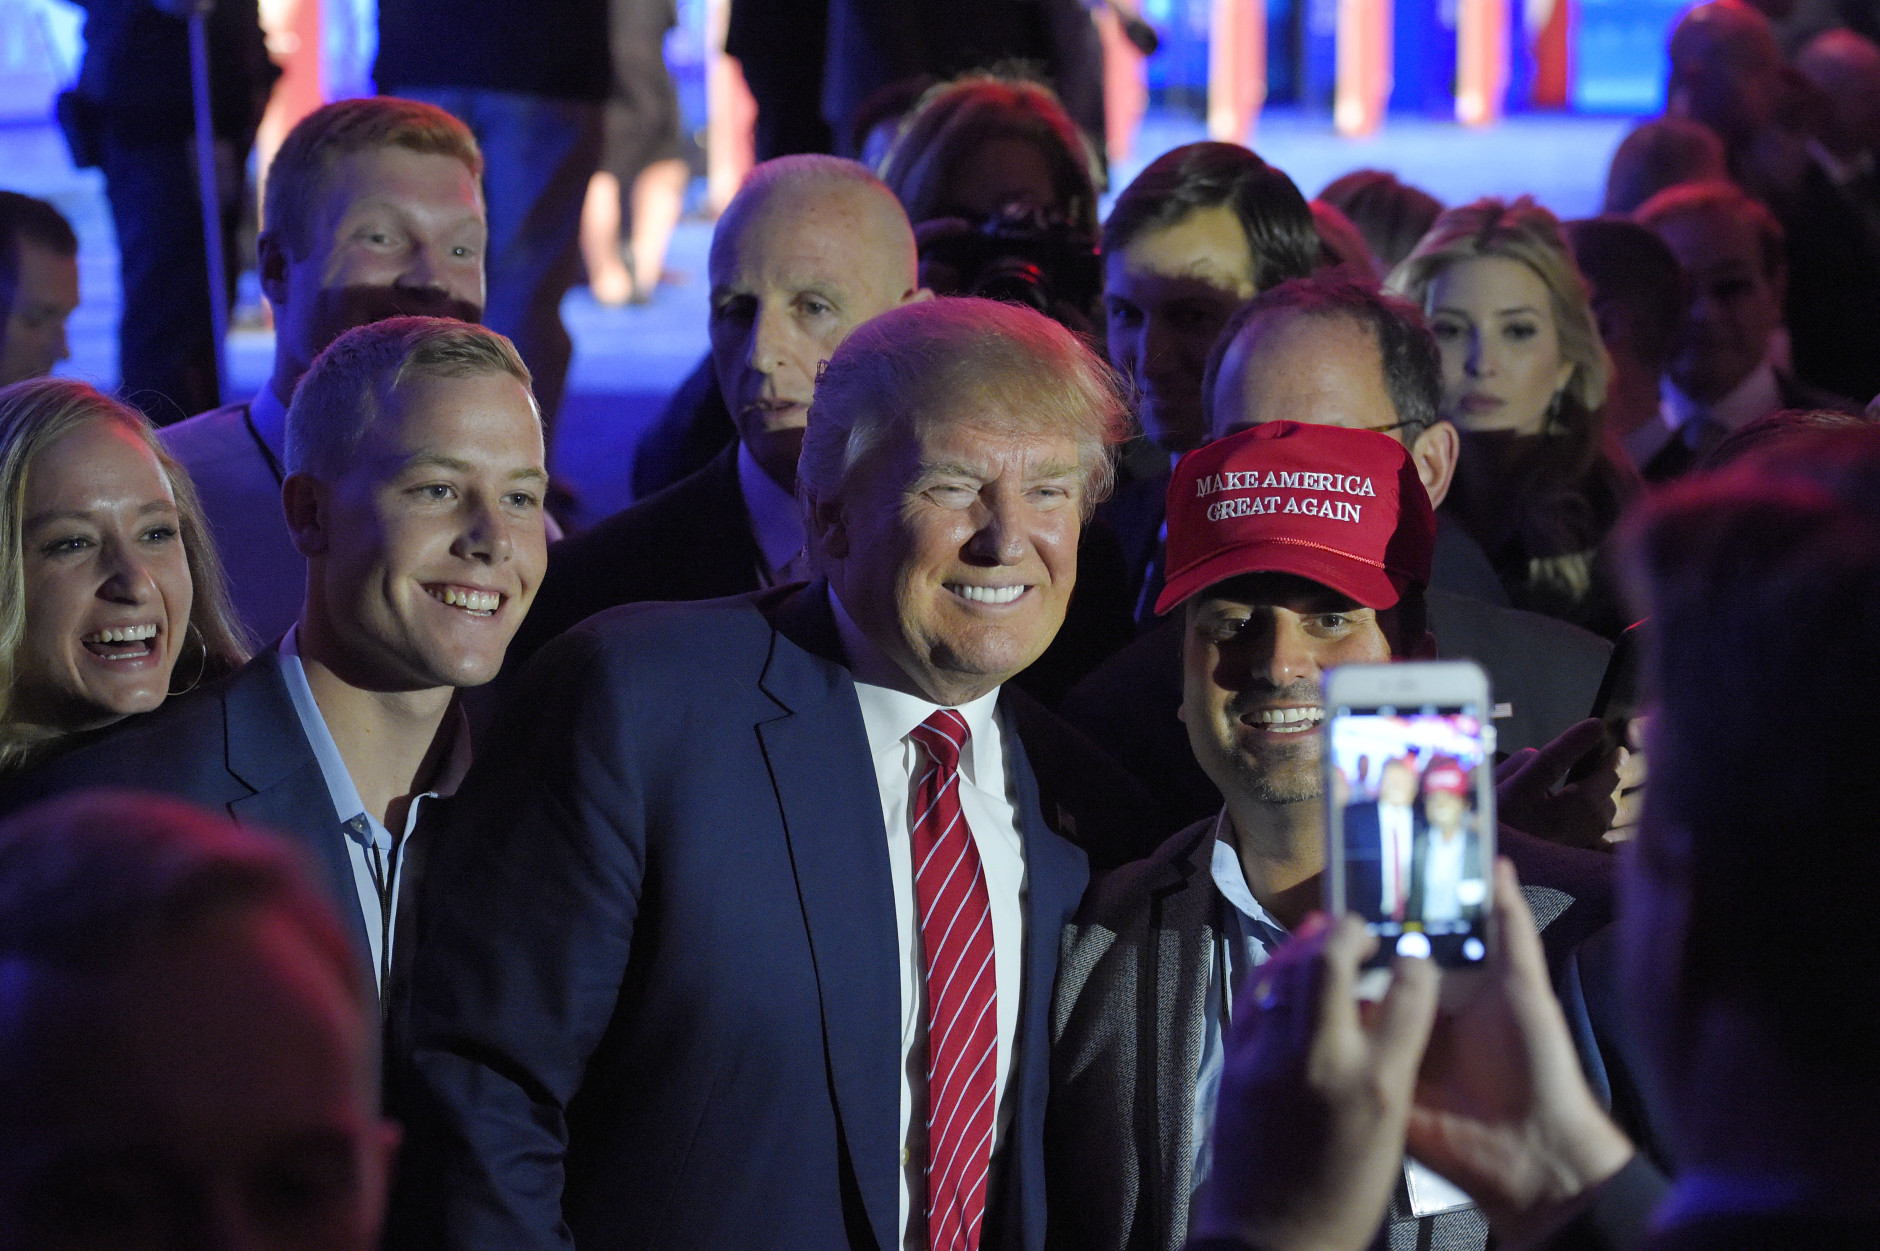 Donald Trump, center, poses for a photo with Denver attorney Gabriel Schwartz (with hat) and others following the CNBC Republican presidential debate at the University of Colorado, Wednesday, Oct. 28, 2015, in Boulder, Colo. (AP Photo/Mark J. Terrill)